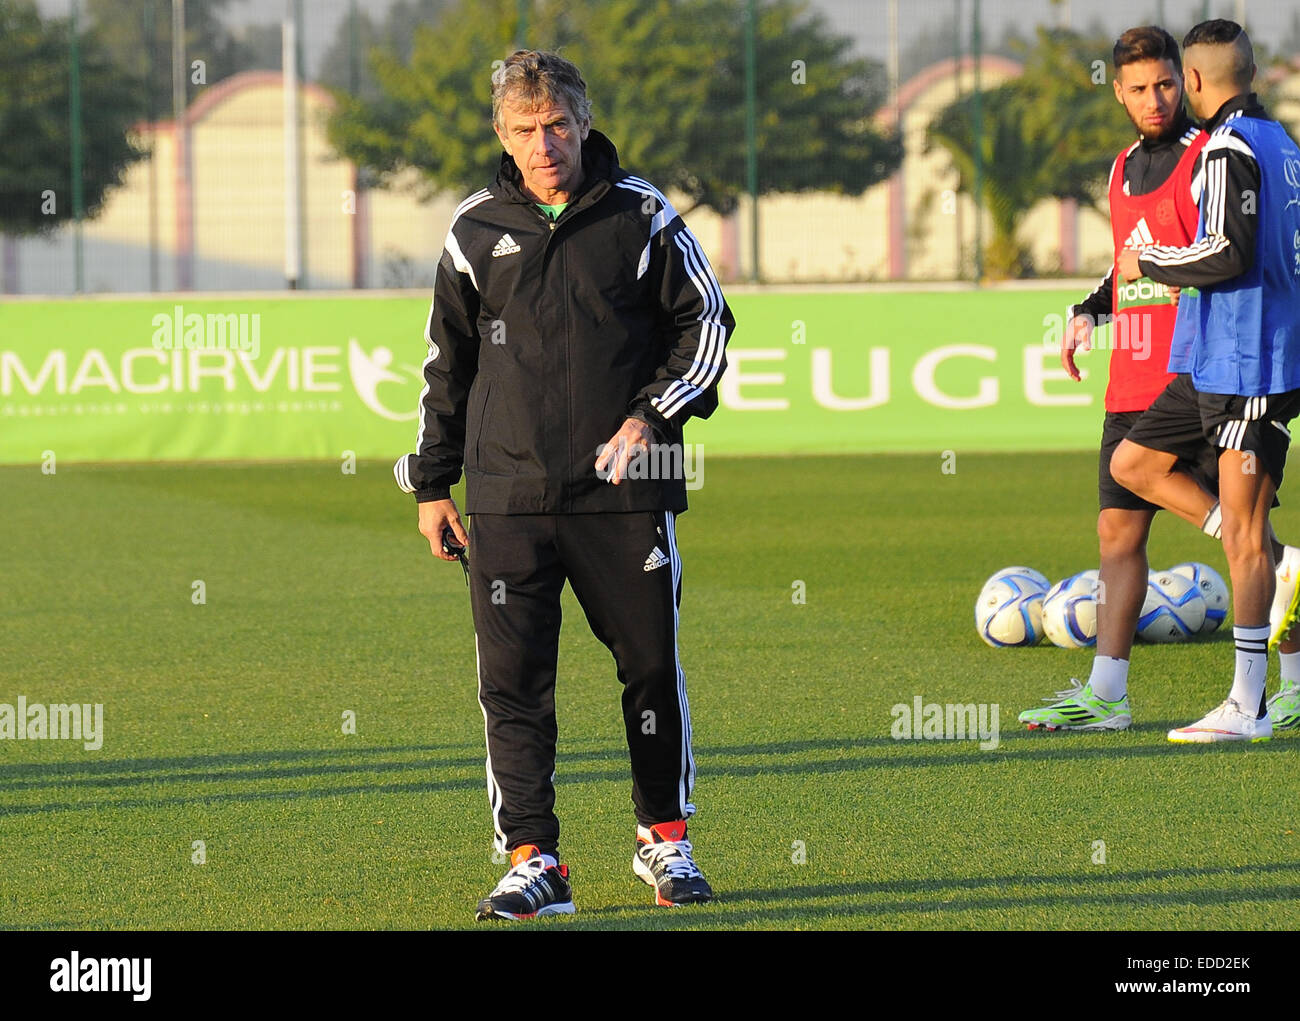 Algiers. 6th Jan, 2015. Algerian national football team head coach Christian Gourcuff (Front) attends a training session in Algiers, capital of Algeria, Jan. 5, 2015. The 2015 Africa Cup of Nations will be held in Equatorial Guinea from Jan. 17 to Feb. 8. © Xinhua/Alamy Live News Stock Photo